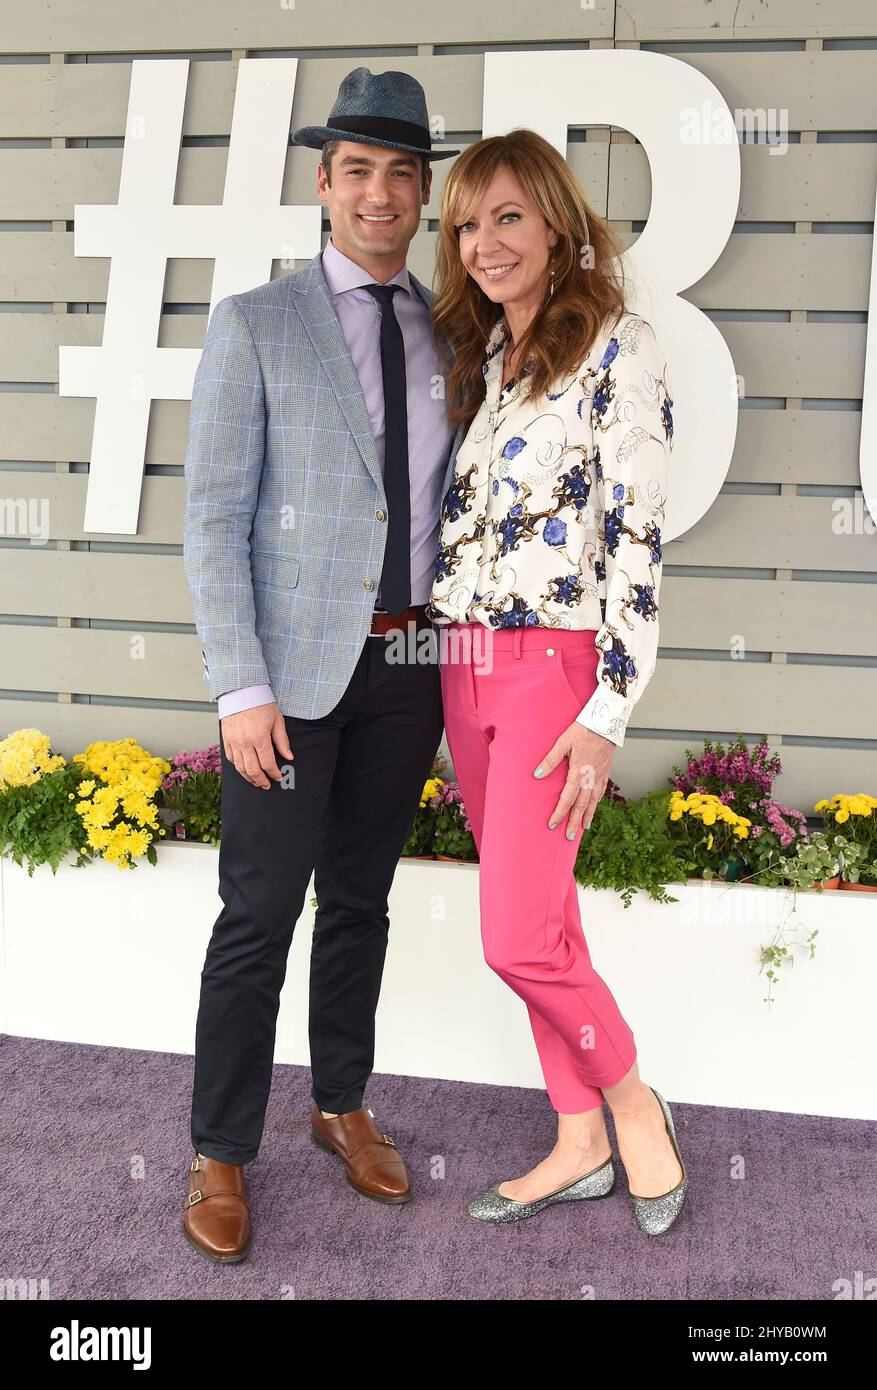 Allison Janney and Philip Joncas attends the 33rd running of the Breeders'Cup World Championships, one of Thoroughbred racing's most prestigious international events held at Santa Anita Park Stock Photo